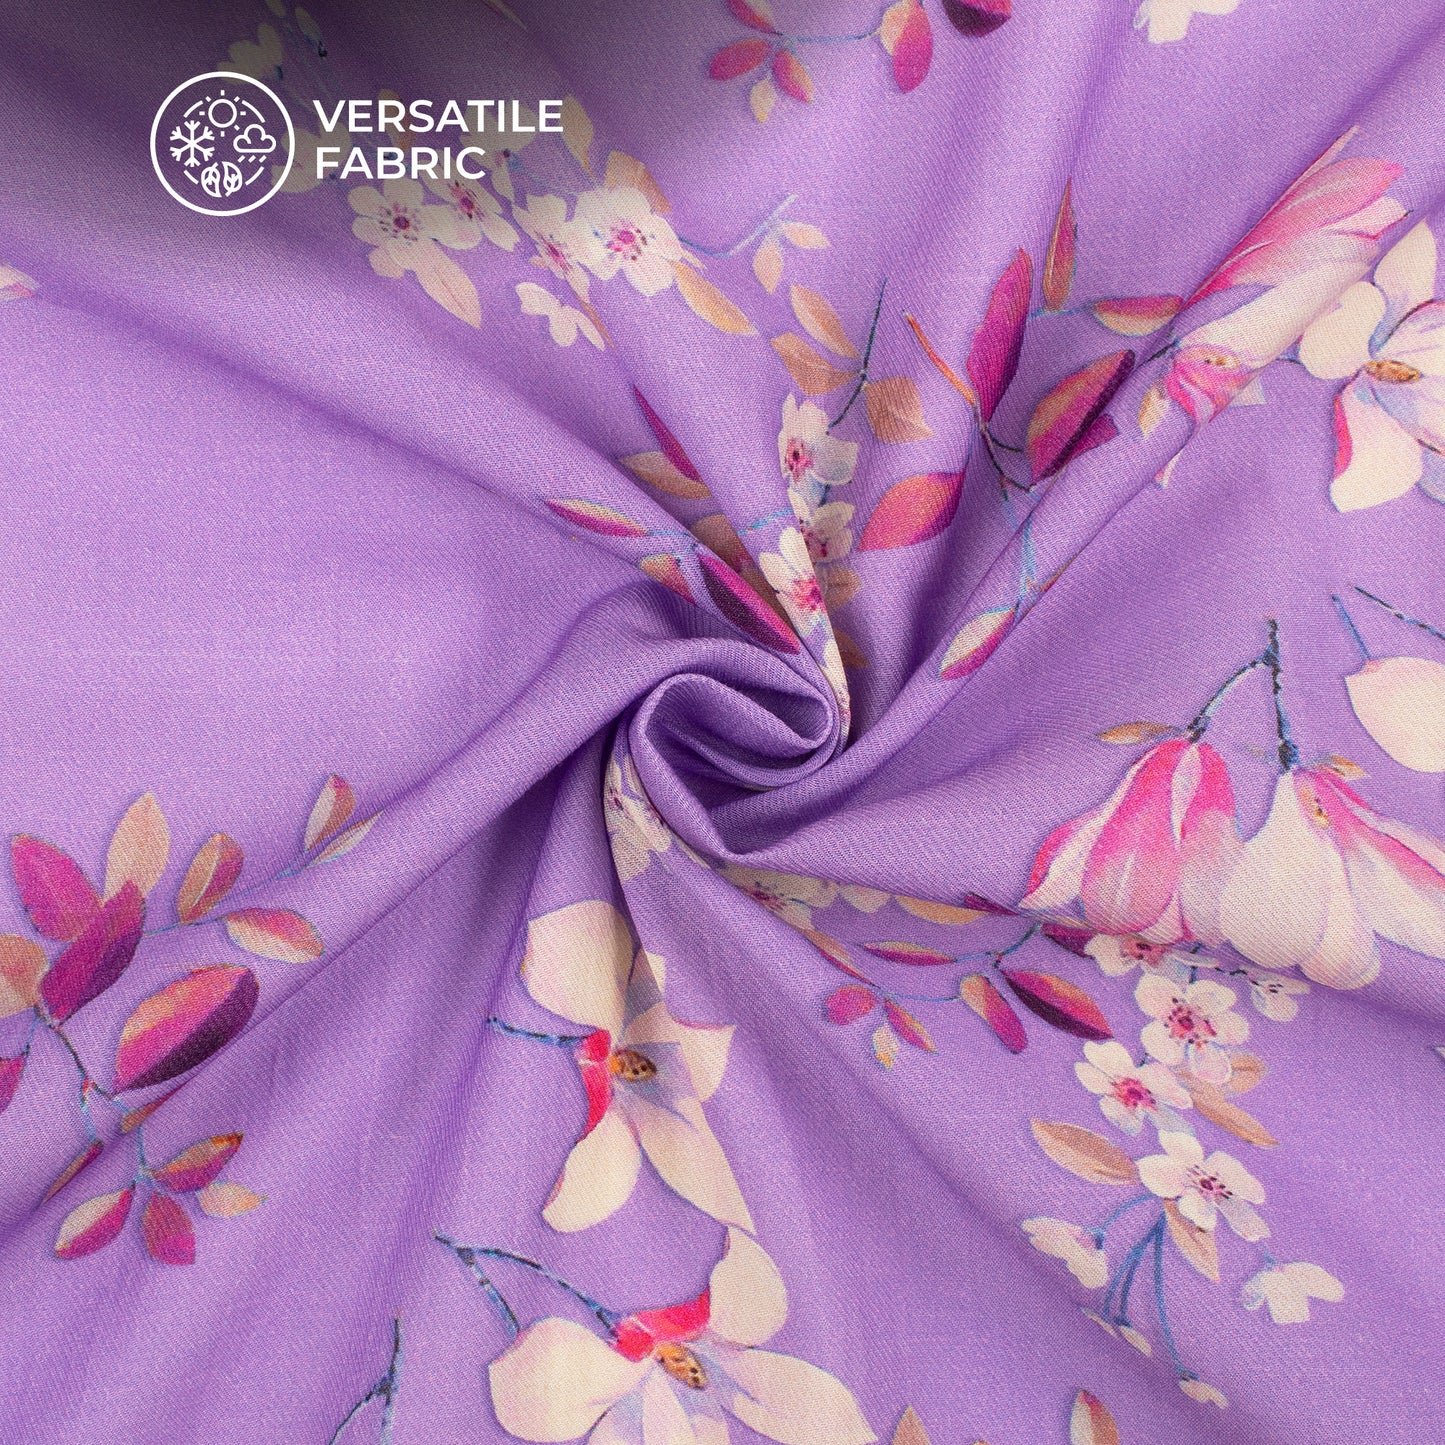 Lilac Purple Floral Printed Sustainable Milk Fabric